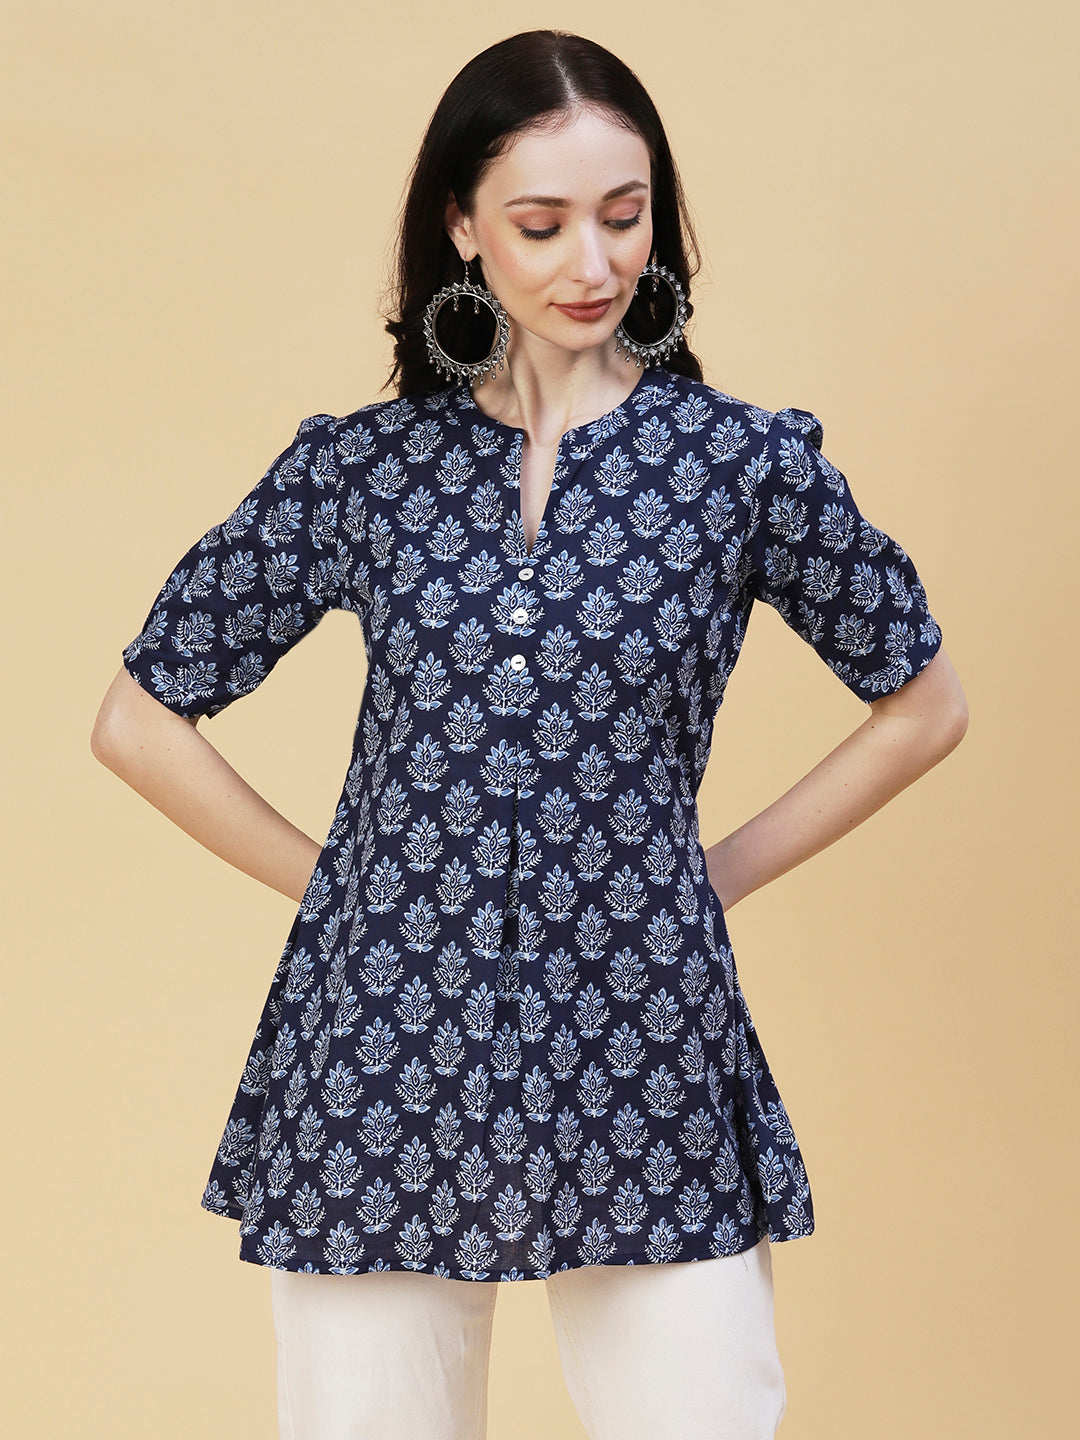 Floral Block Printed Mother-of-Pearl Buttoned Short Kurti - Navy Blue